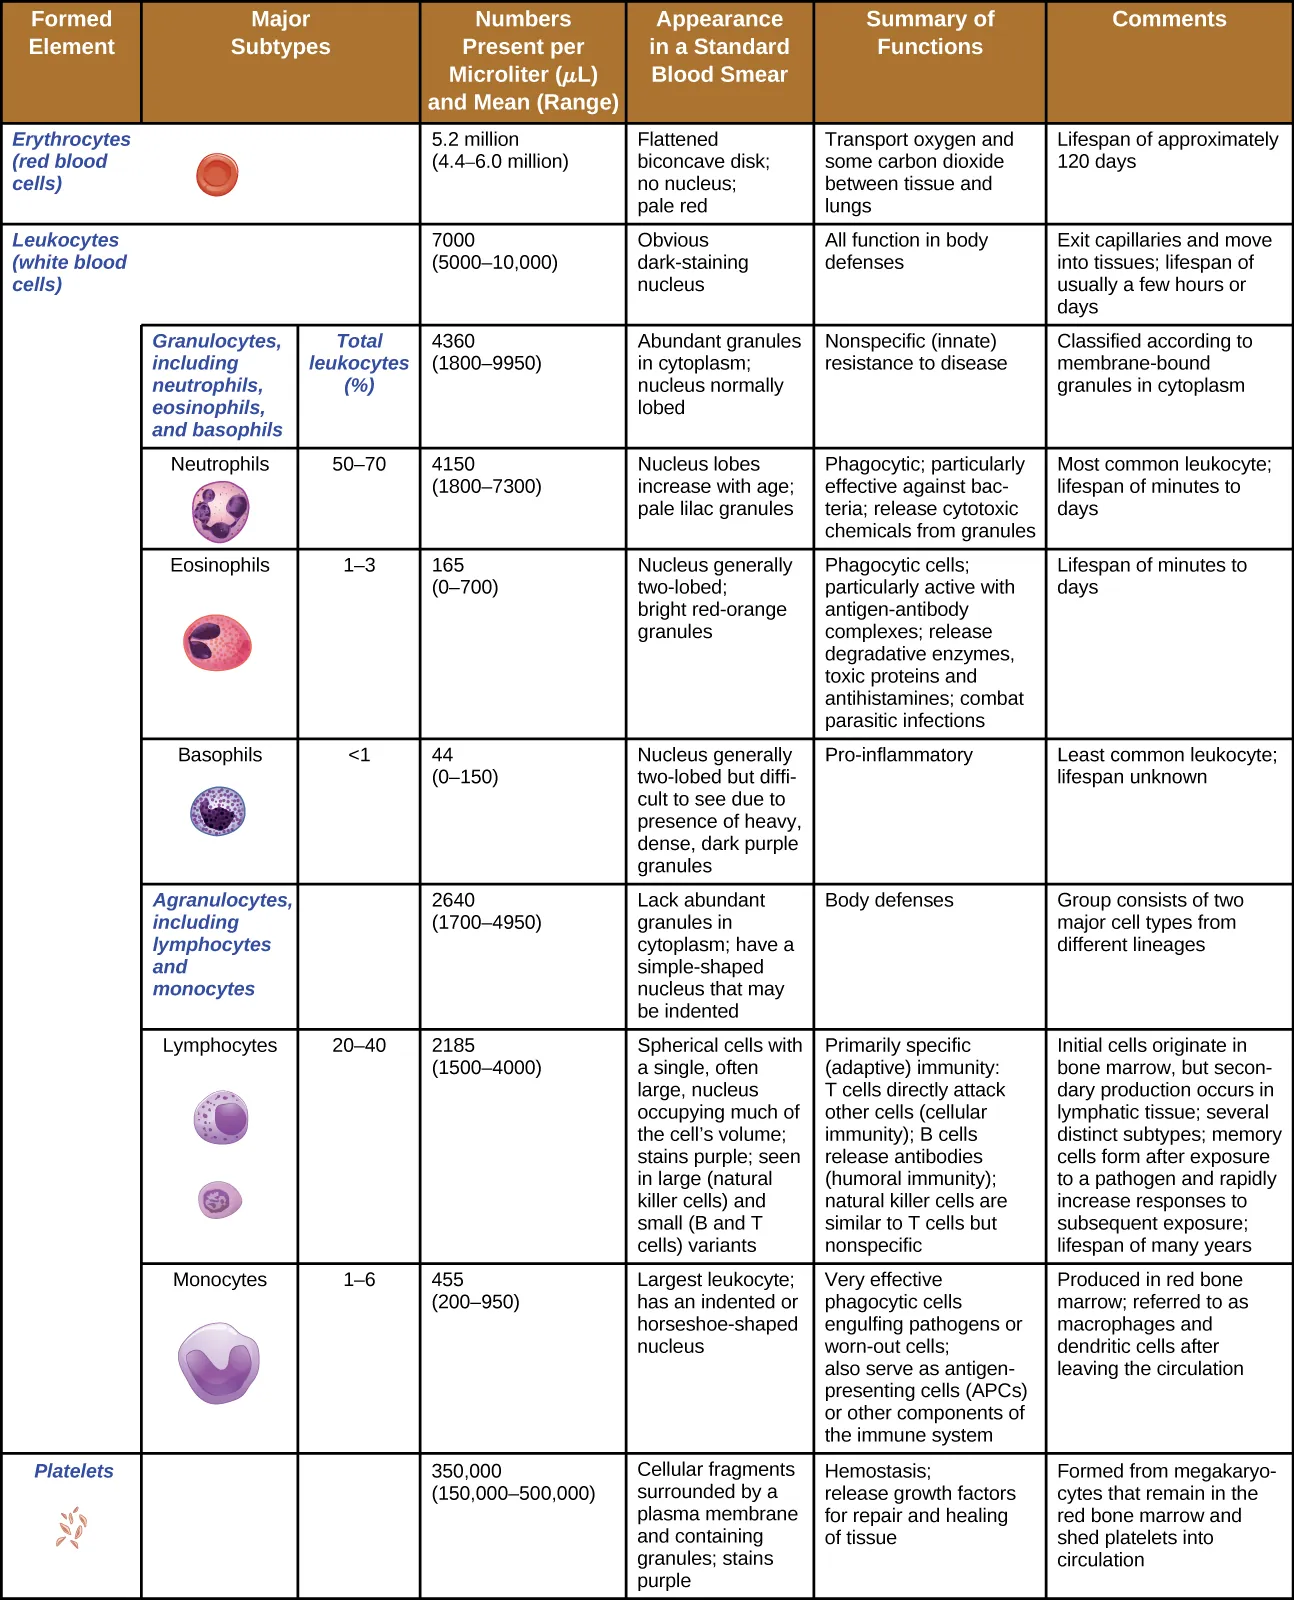 A table of the formed elements. Top row reads: formed element, major subtypes, numbers present per microliter and mean, appearance in standard blood smear, summary of functions, and comments. The first row is for erythrocytes (red blood cells). There are 5.2 million per microliter of blood (ranging from 4.4 – 6 million). These cells are flattened biconcave disks with no nucleus and a pale red color. Their function is to transport oxygen and some carbon dioxide between tissue and lungs. Their lifespan is approximately 120 days. The set of rows is classified under leukocytes (white blood cells). Leukocytes as a group number 7000 per microliter of blood (ranging from 5000-10,000). Leukocytes have an obvious dark-staining nucleus and function in body defenses. They exit capillaries and move into tissues. Their lifespan is usually a few hours or days. Leukocytes are divided into two groups. The first is granulocytes including neutrophils, eosinophils, and basophils. The second is agranulocytes including lymphocytes and monocytes. Granulocytes number 4300 per microliter of blood (range of 1800-9950). Granulocytes have abundant granules in the cytoplasm and the nucleus is normally lobed. Granulocytes function in nonspecific (innate) resistance to disease and are classified according to membrane-bound granules in the cytoplasm. Neutrophils make up 50-70% of the total leukocytes and number 4150 per microliter of blood (range 1800-7300). Neutrophils have a nucleus with lobes that increase with age and pale lilac granules. They are phagocytic and particularly effective against bacteria; they release toxic chemicals from granules. Neutrophils are the most common leukocyte with a lifespan of minutes to days. Eosinophils make up 1-3% of total leukocytes. They number 165 per microliter of blood (range of 0 – 700). Eosinophils have a nucleus that is generally two-lobed and bright red-orange granules. They are phagocytic cells and particularly effective with antigen-antibody complexes. Eosinophils release antihistamines and increase allergies, they also help fight parasitic infections. Eosinophils have a lifespan of minutes to days. Basophils make up less than 1% of total leukocytes. They number 44 per microliter of blood (range 0 – 150). Basophils have a nucleus that is generally two lobed but difficult to see due to the presence of heavy, dense, dark purple granules. Basophils promote inflammation and are the least common leukocyte. Their lifespan is unknown. Agranulocytes (including lymphocytes and monocytes) number 2640 per microliter of blood (range 1700 – 4900). Agranulocytes lack abundant granules in the cytoplasm and have a simple-shaped nucleus that may be indented. They function in body defenses and are grouped into two major cell types from different lineages. Lymphocytes make up 20-40% of total leukocytes and number 2185 per microliter of blood (range 1500-4000). Lymphocytes are spherical cells with a single, often large, nucleus occupying much of the cell’s volume. They stain purple and are seen in large (natural killer cells) and small (B and T cells) variants. Lymphocytes are primarily involved in specific (adaptive) immunity. T cells directly attack other cells (cellular immunity); natural killer cells are similar to T cells but nonspecific. Lymphocytes originate in bone marrow but secondary production occurs in lymphatic tissue. Several distinct subtypes. Memory cells form after exposure to a pathogen and rapidly increase responses to subsequent exposure. Lifespan of many years. Monocytes make up 1-6% of total leukocytes. They number 455 per microliter of blood (range 200-950). Monocytes are large leukocytes with an indented or horseshoe-shaped nucleus. They are very effective phagocytic cells engulfing pathogens or worn out cells and also serve as antigen presenting cells (APCs) or other components of the immune system. Monocytes are produced in red bone marrow and are referred to as macrophages and dendritic cells after leaving circulation. The last row of the table is for platelets. These number 350,000 per microliter of blood (range 150,000-500,000). Platelets are cellular fragments surrounded by a plasma membrane and containing granules. They stain purple. The function of platelets is hemostasis plus releasing growth factors for repair and healing of tissues. They are formed from megakaryocytes that remain in the red bone marrow and shed platelets into circulation.